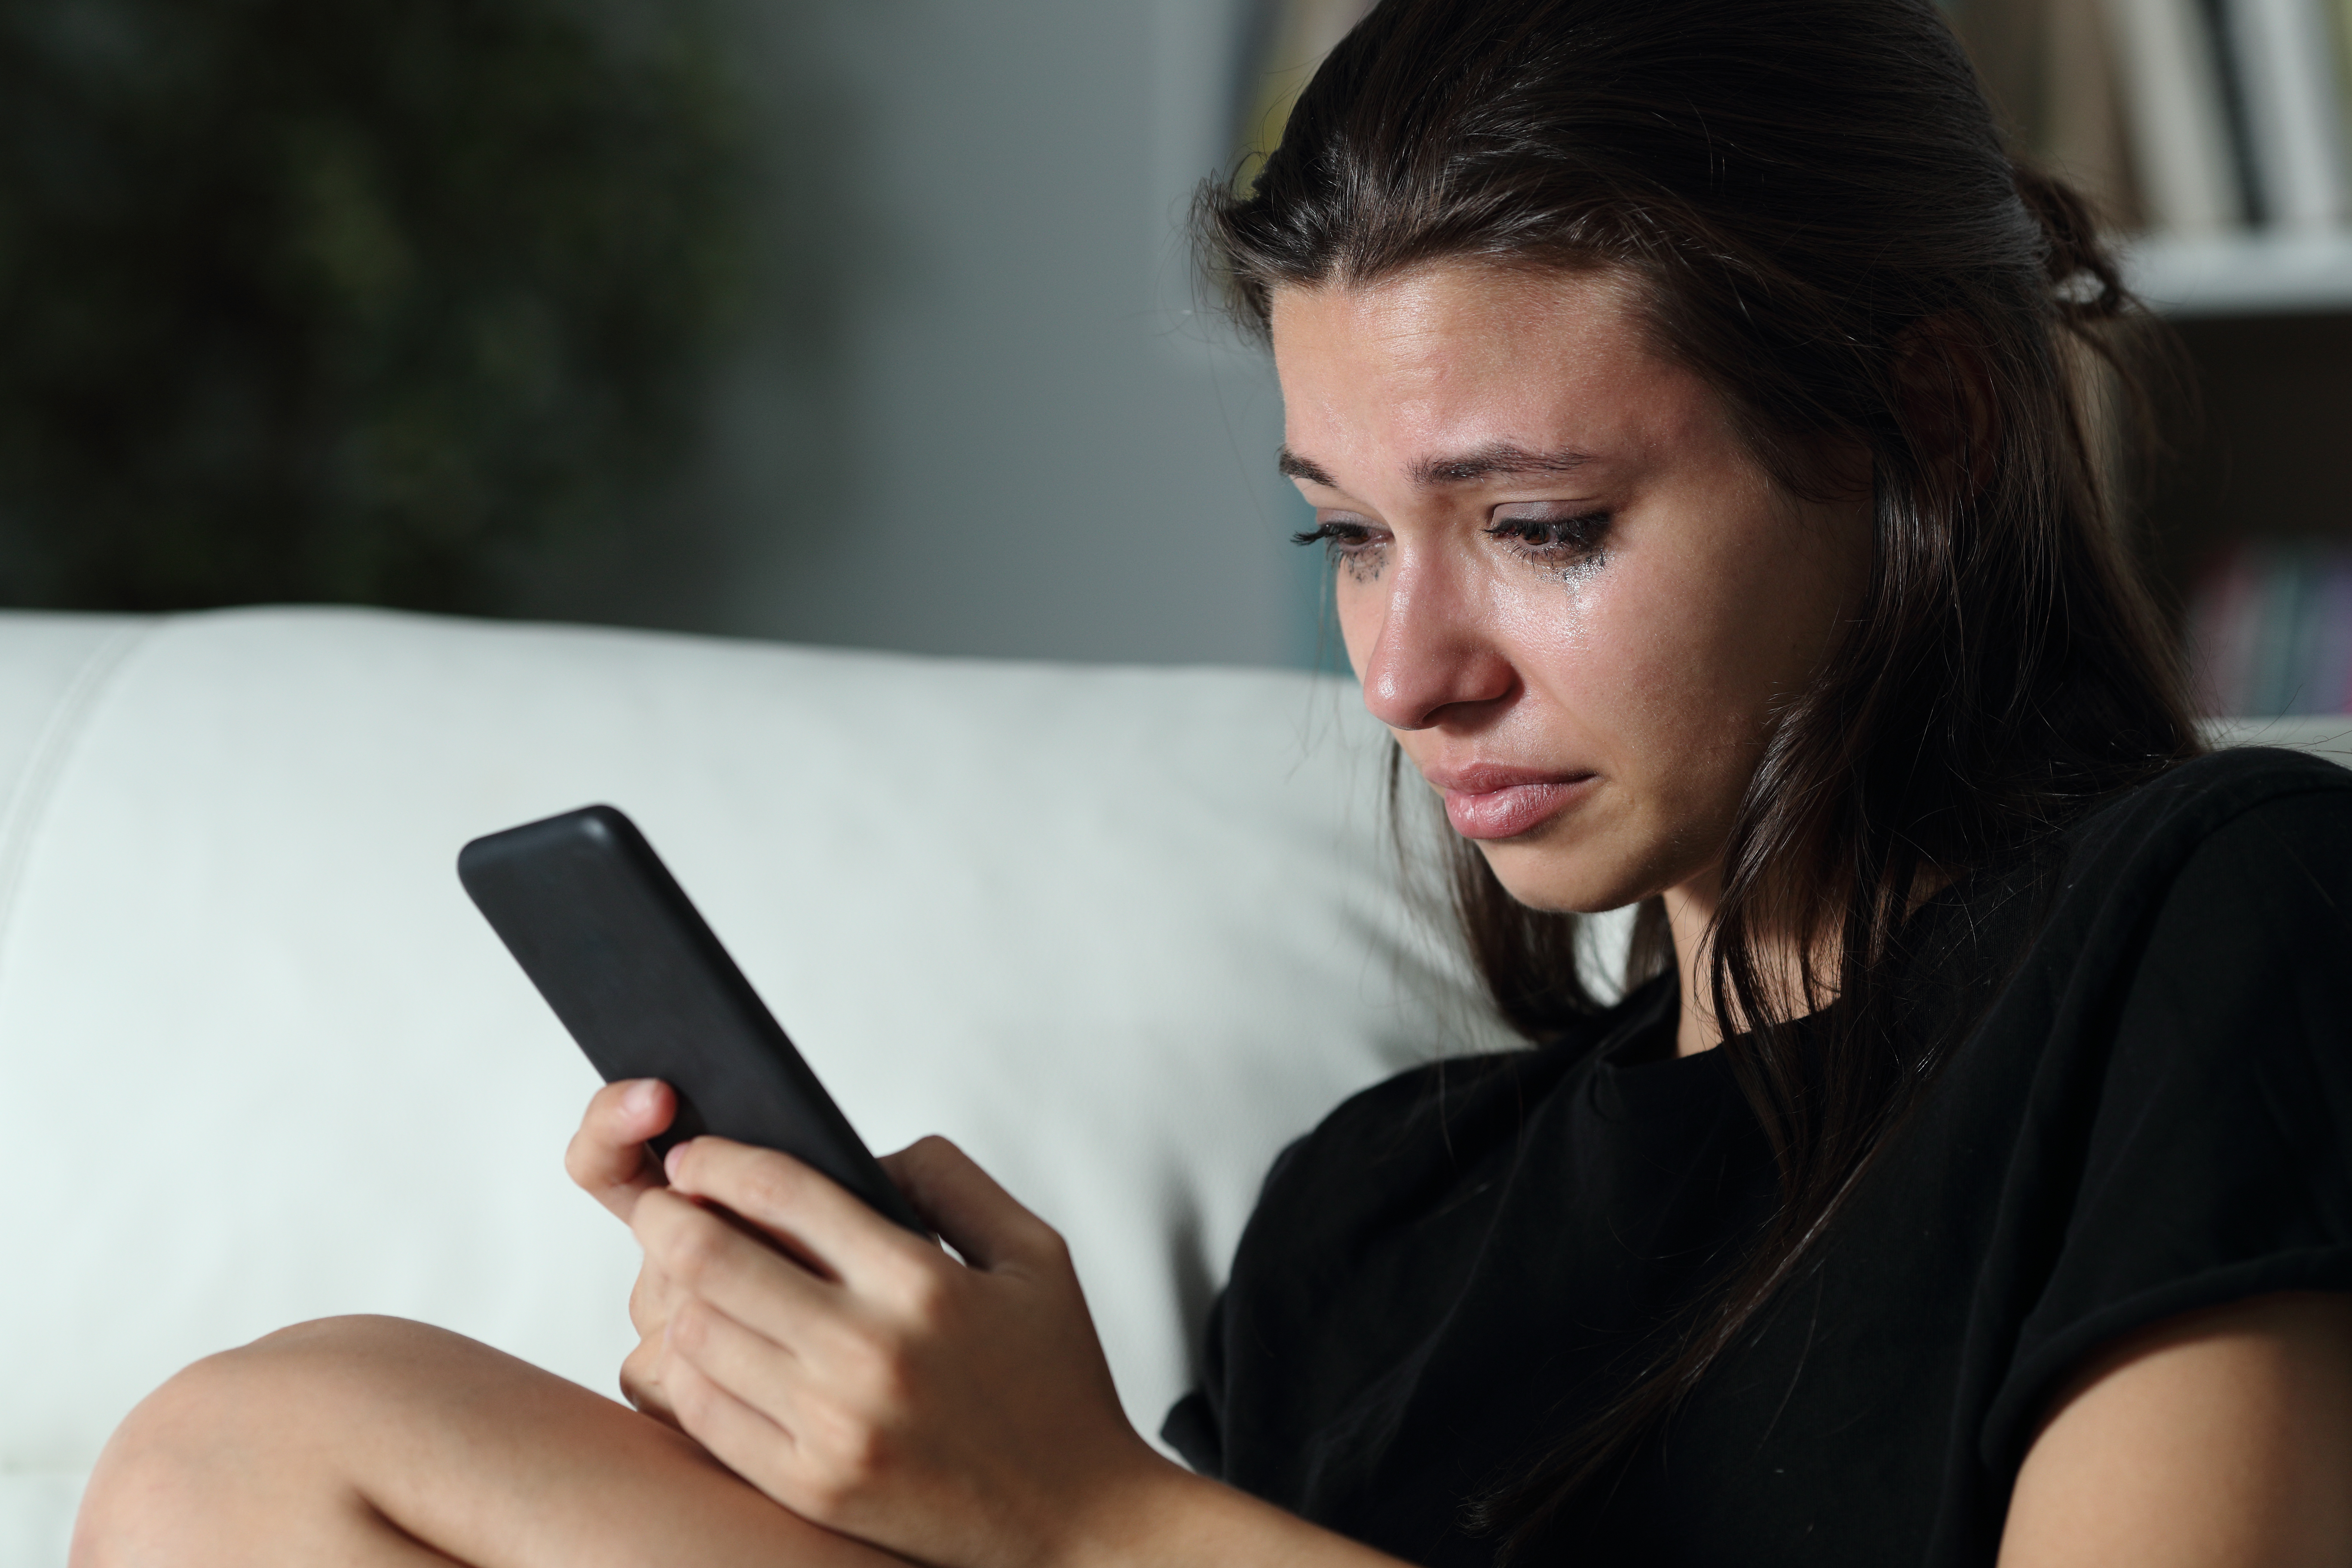 A teary-eyed young girl is pictured looking at her cell phone. | Source: Shutterstock